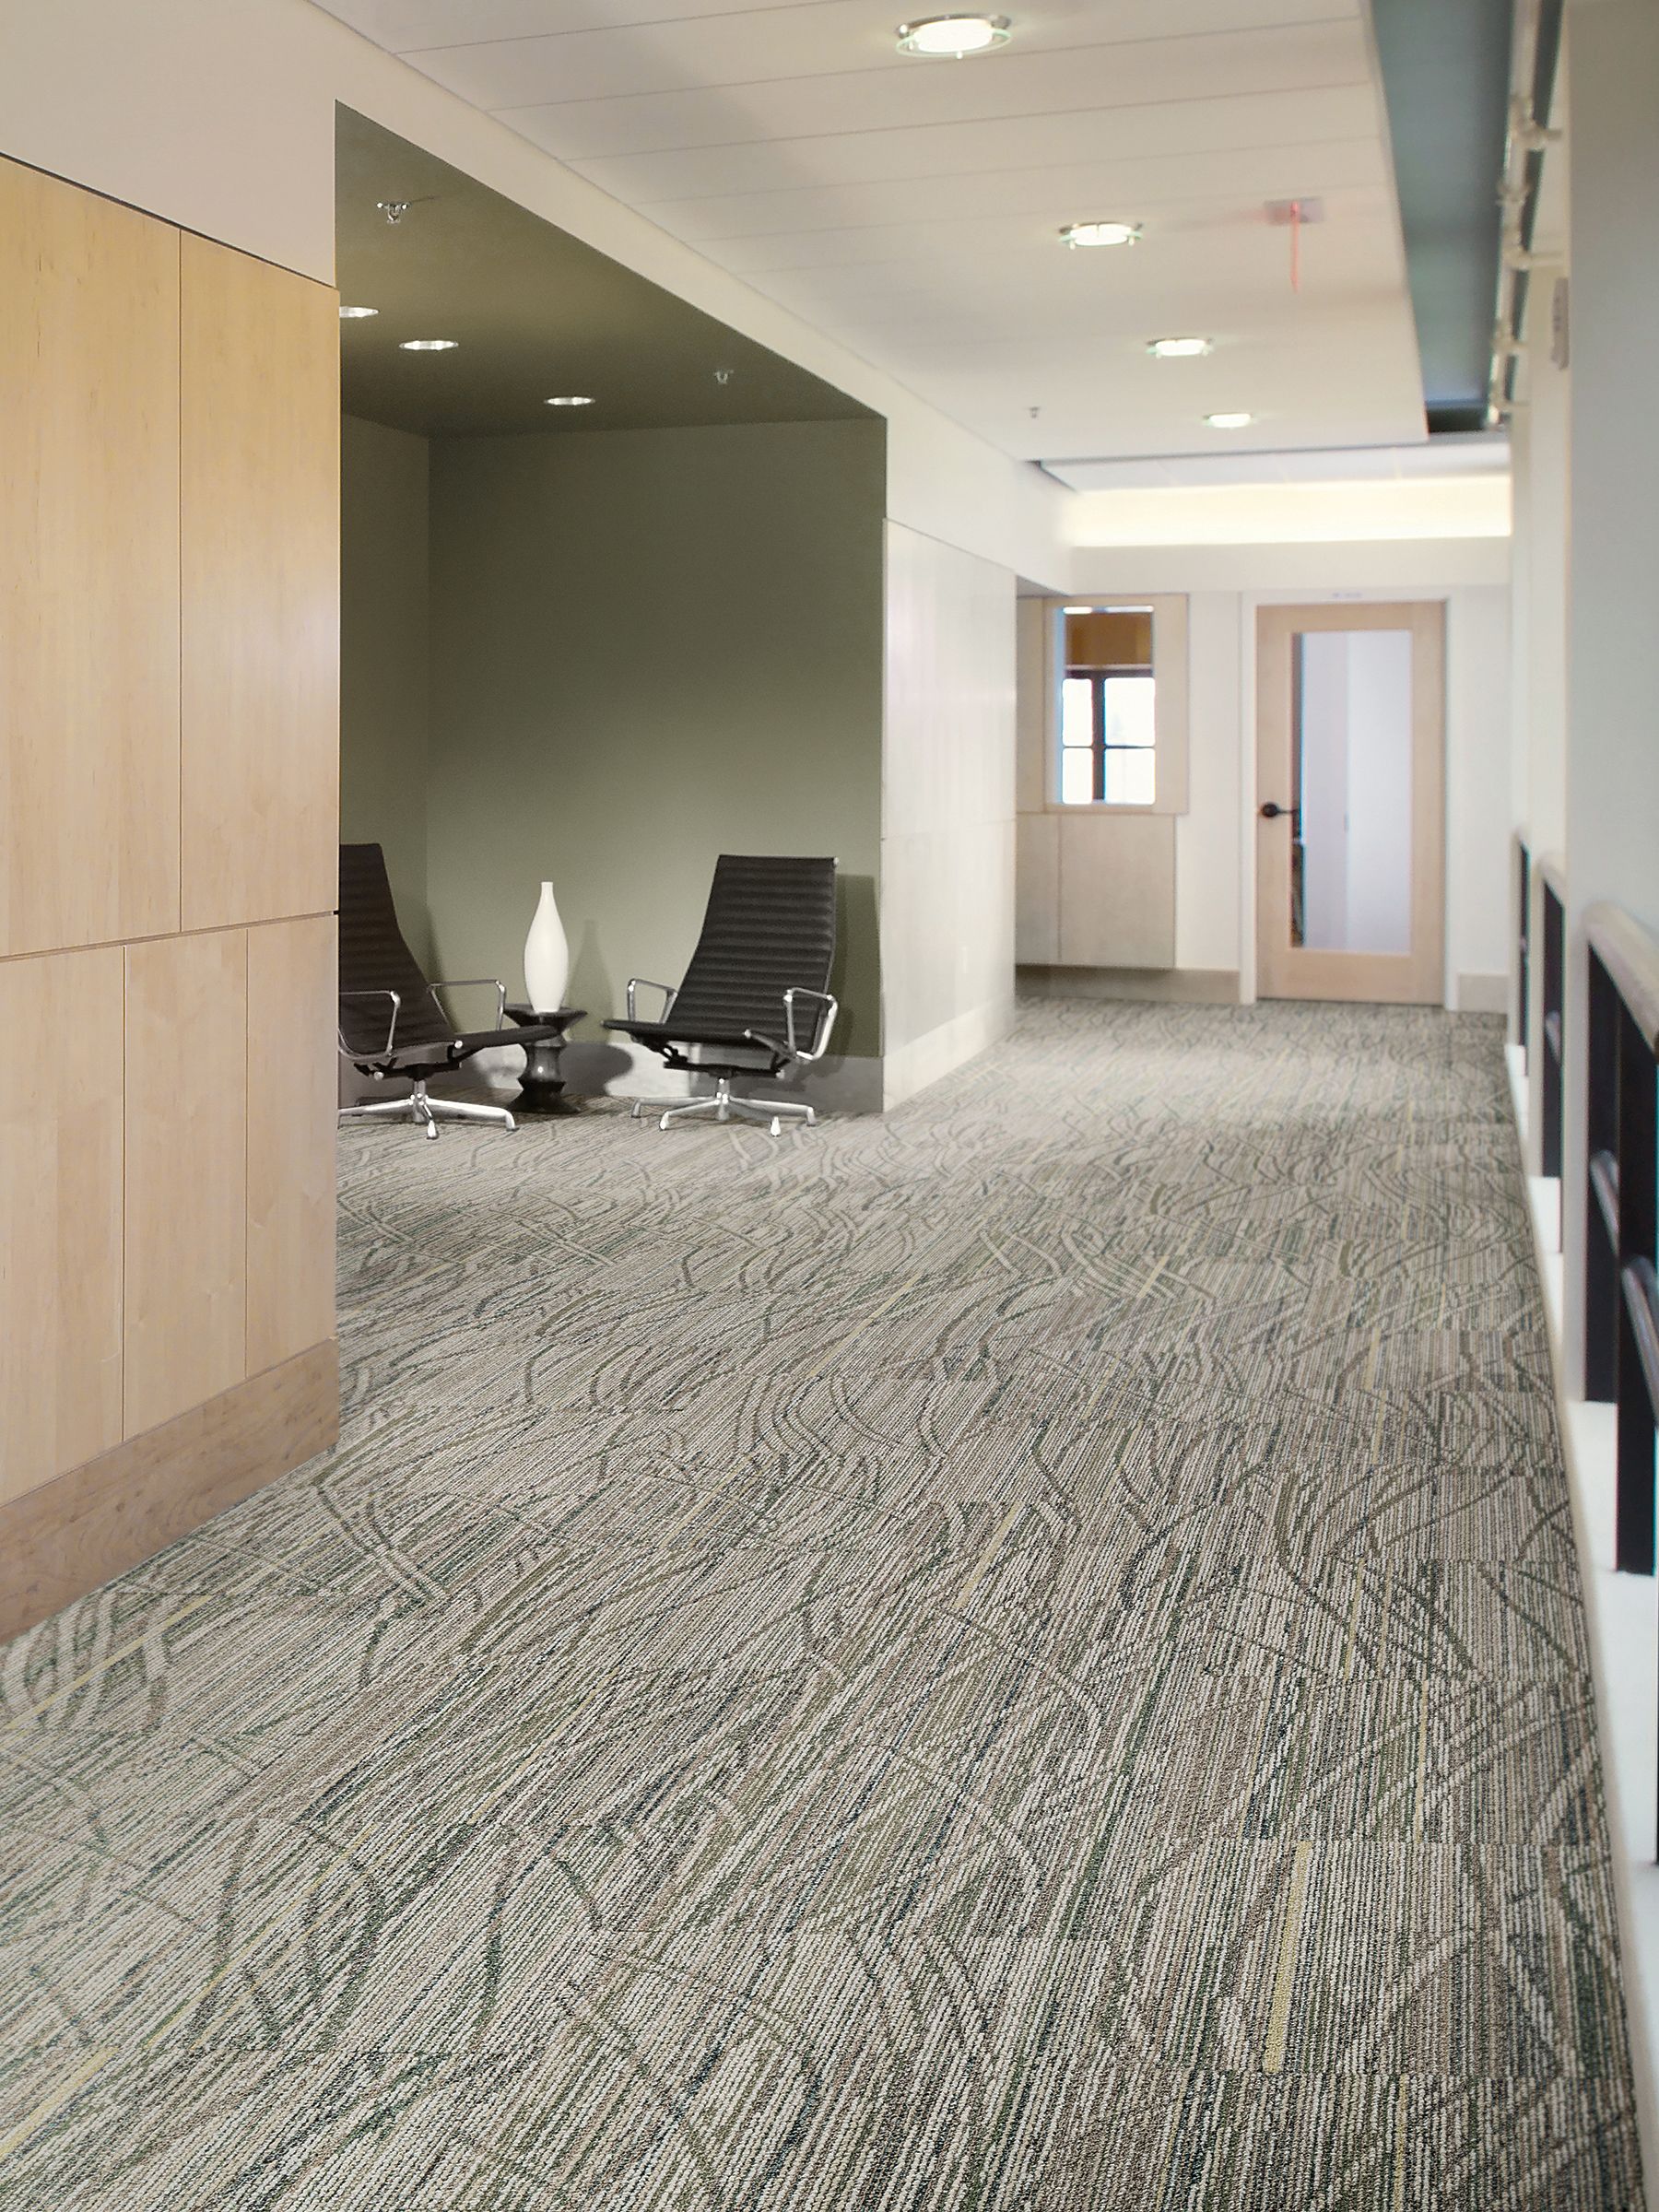 Interface Prairie Grass Loop carpet tile in corridor with seating area on side imagen número 2